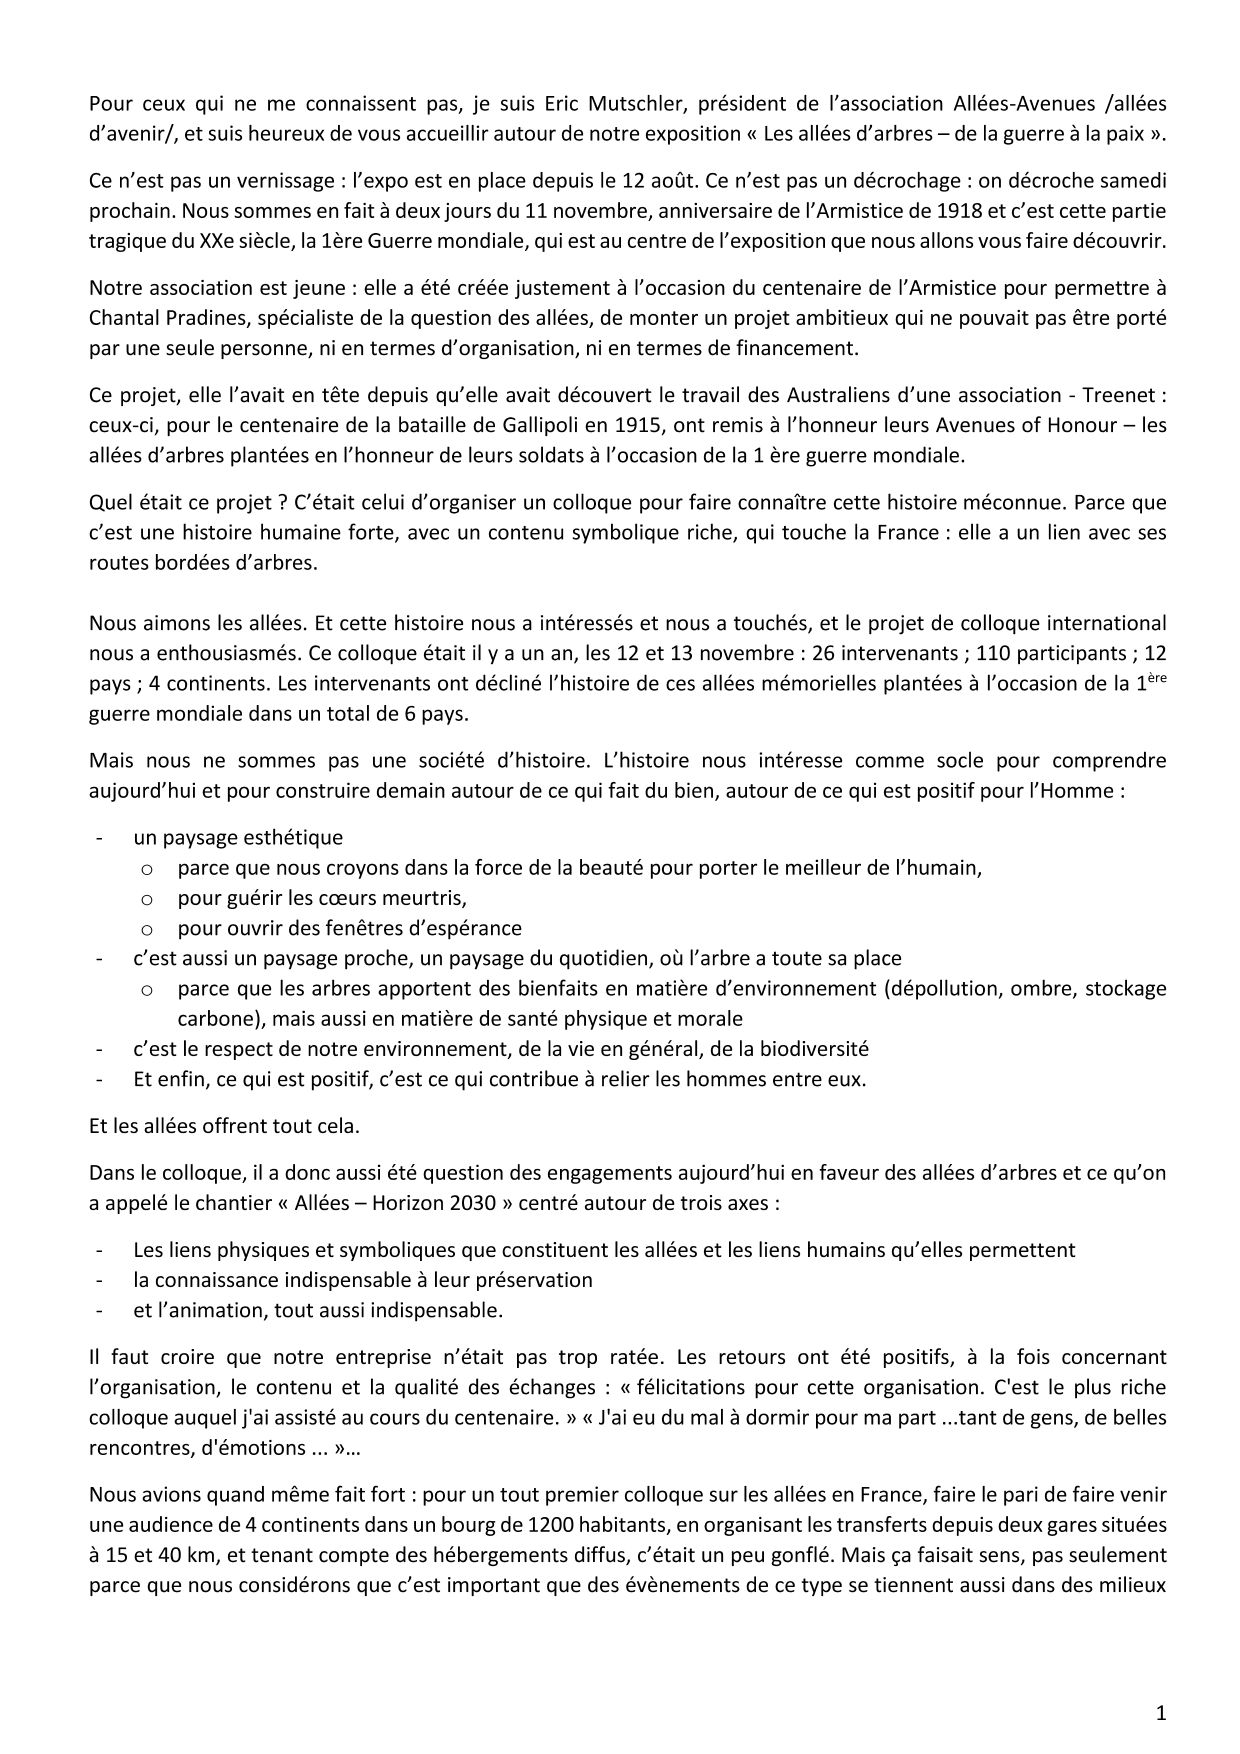 discours Eric 191109 page2